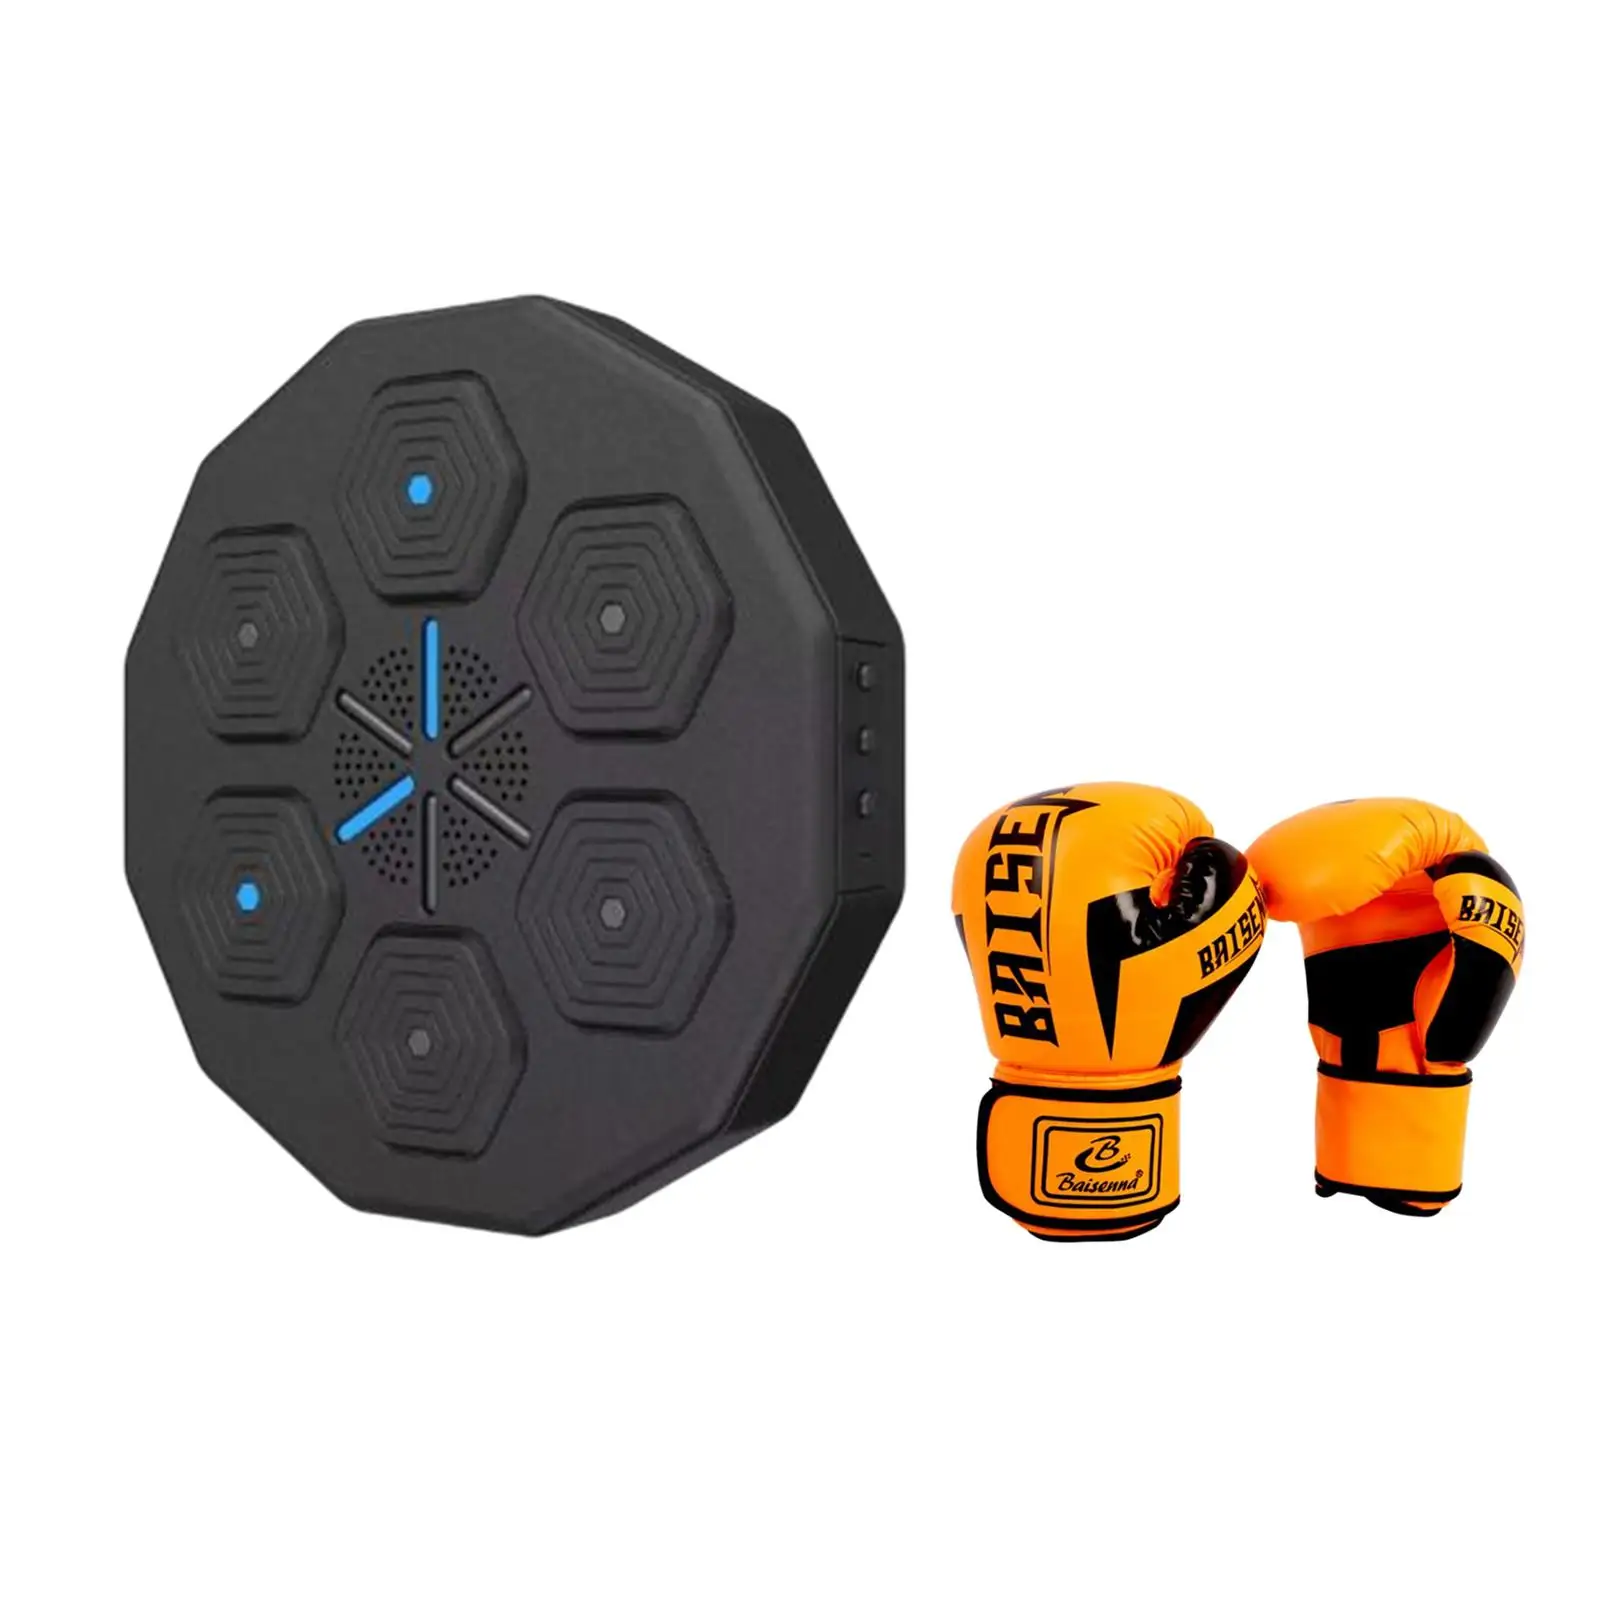 Music Boxing Machine Wall Target Equipment Boxing Trainer Practice Reaction Target with Gloves Punching Pad for Home